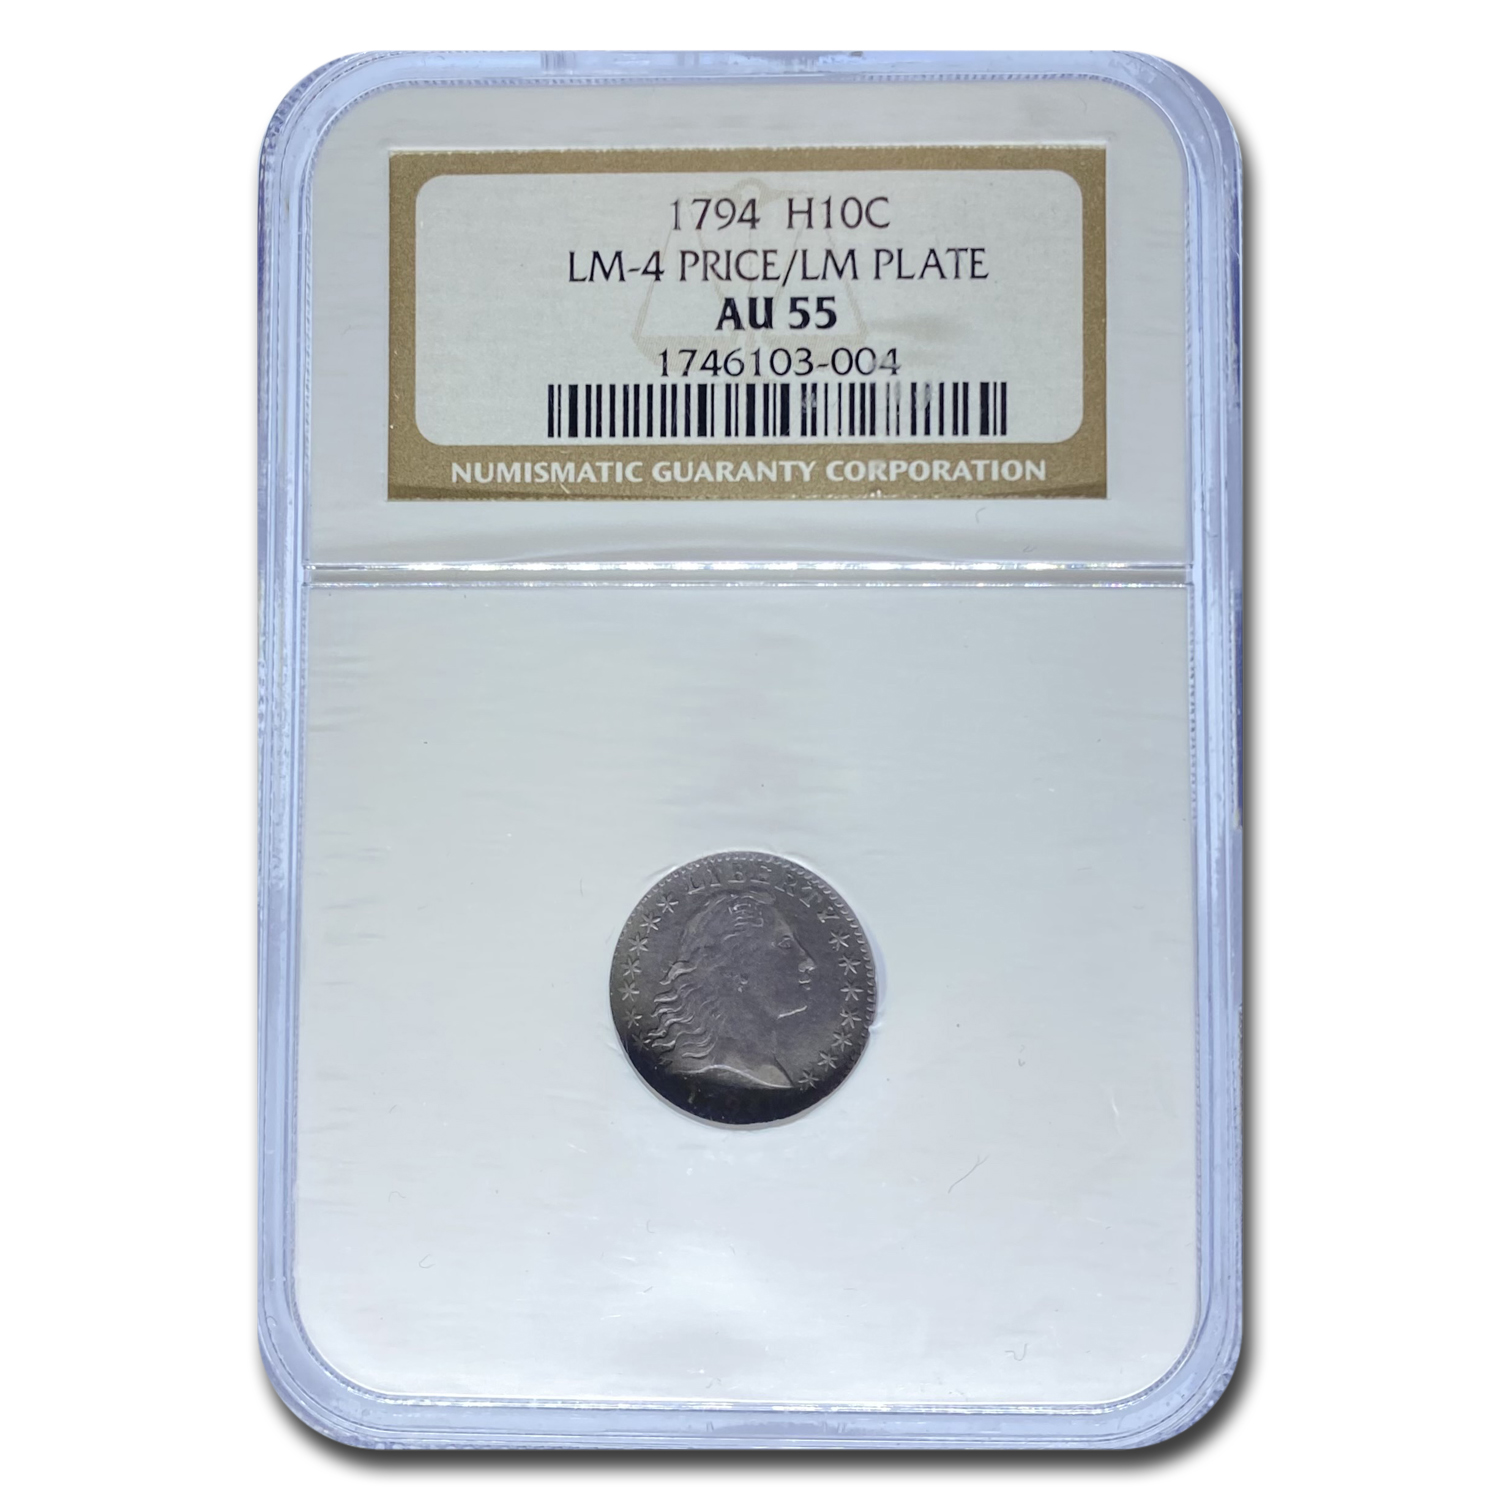 Buy 1794 Flowing Hair Half Dime AU-55 NGC (LM-4 Price/LM Plate) - Click Image to Close